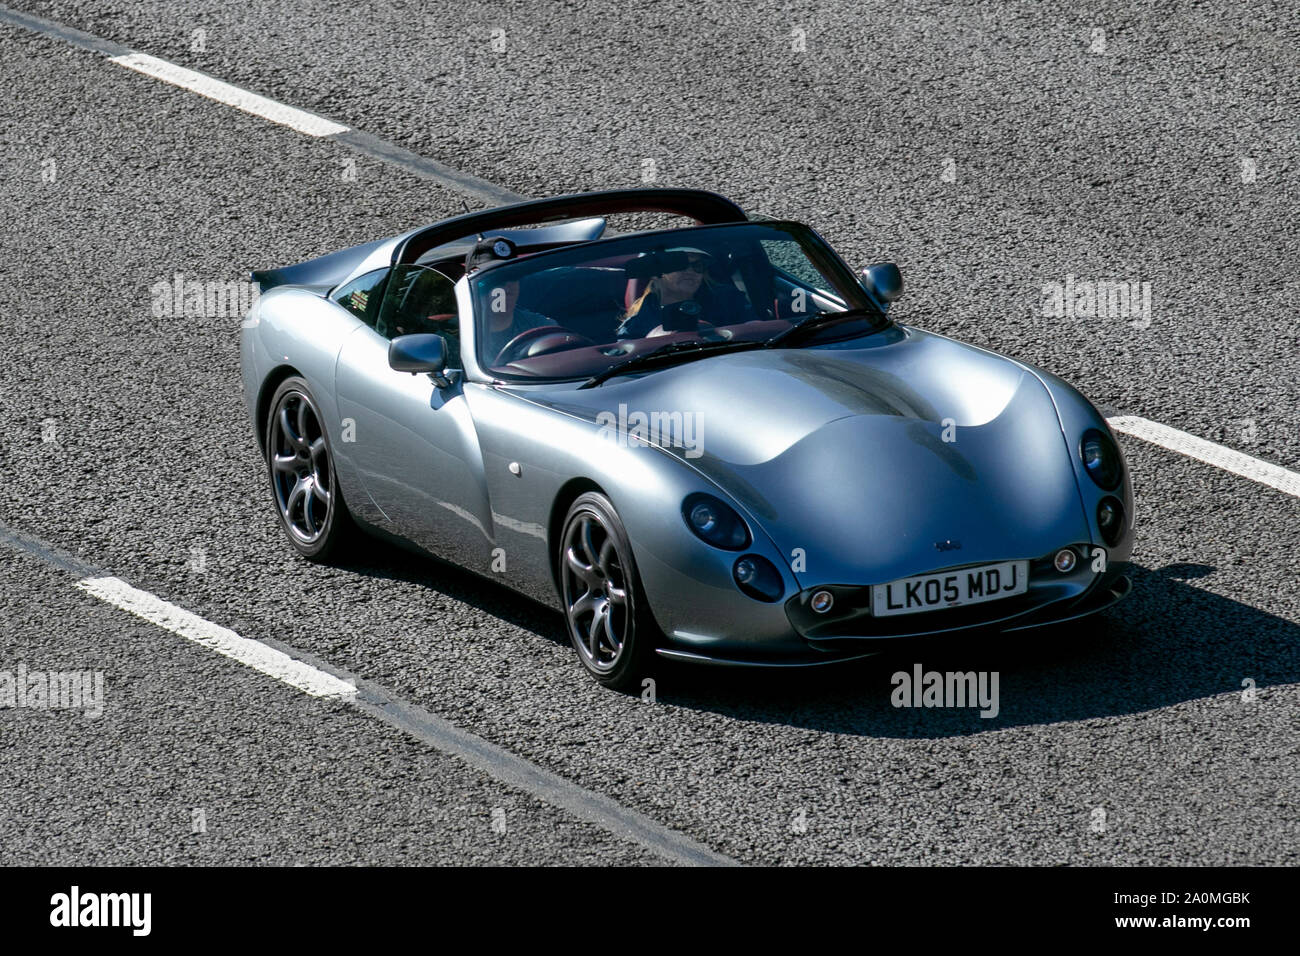 2005 Blue TVR Tuscan S lightweight sports cars,  powerful engines, British hand built, open sport; UK Vehicular traffic, transport, modern, saloon cars, south-bound on the 3 lane M6 motorway highway. Stock Photo